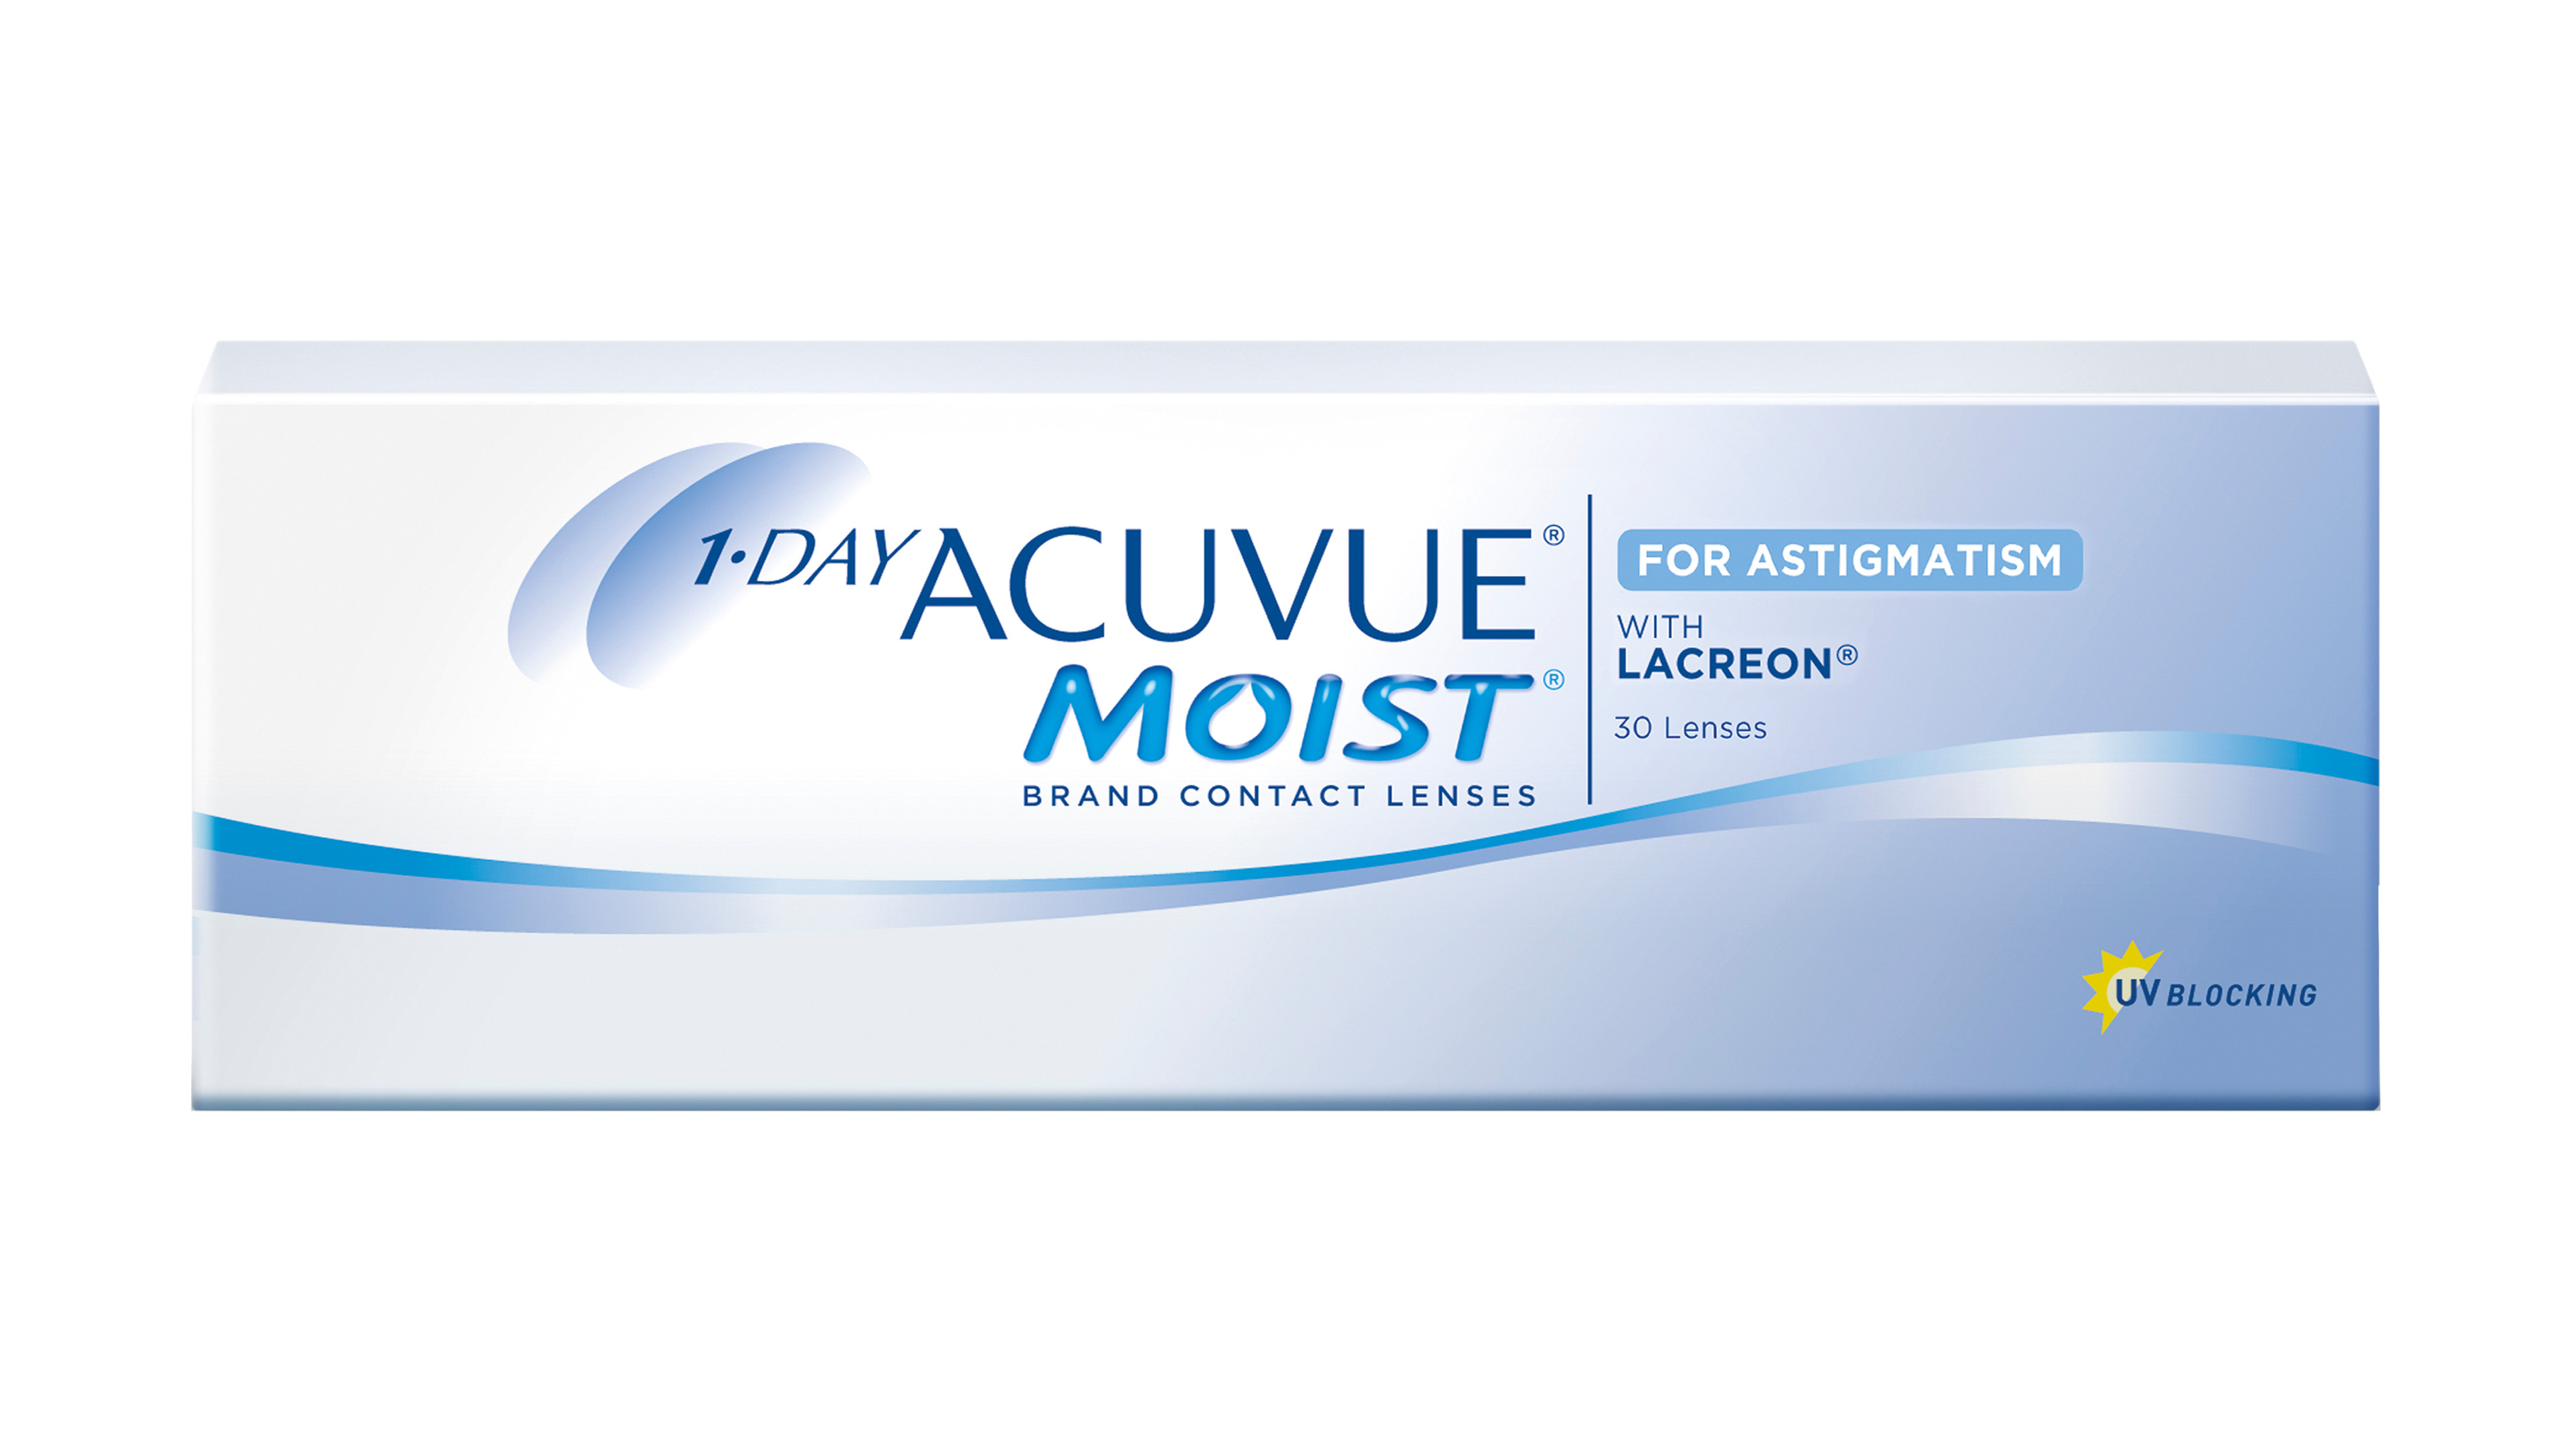 Front ACUVUE® 1-DAY ACUVUE® MOIST for ASTIGMATISM Tageslinsen 30 Linsen pro Packung, pro Auge